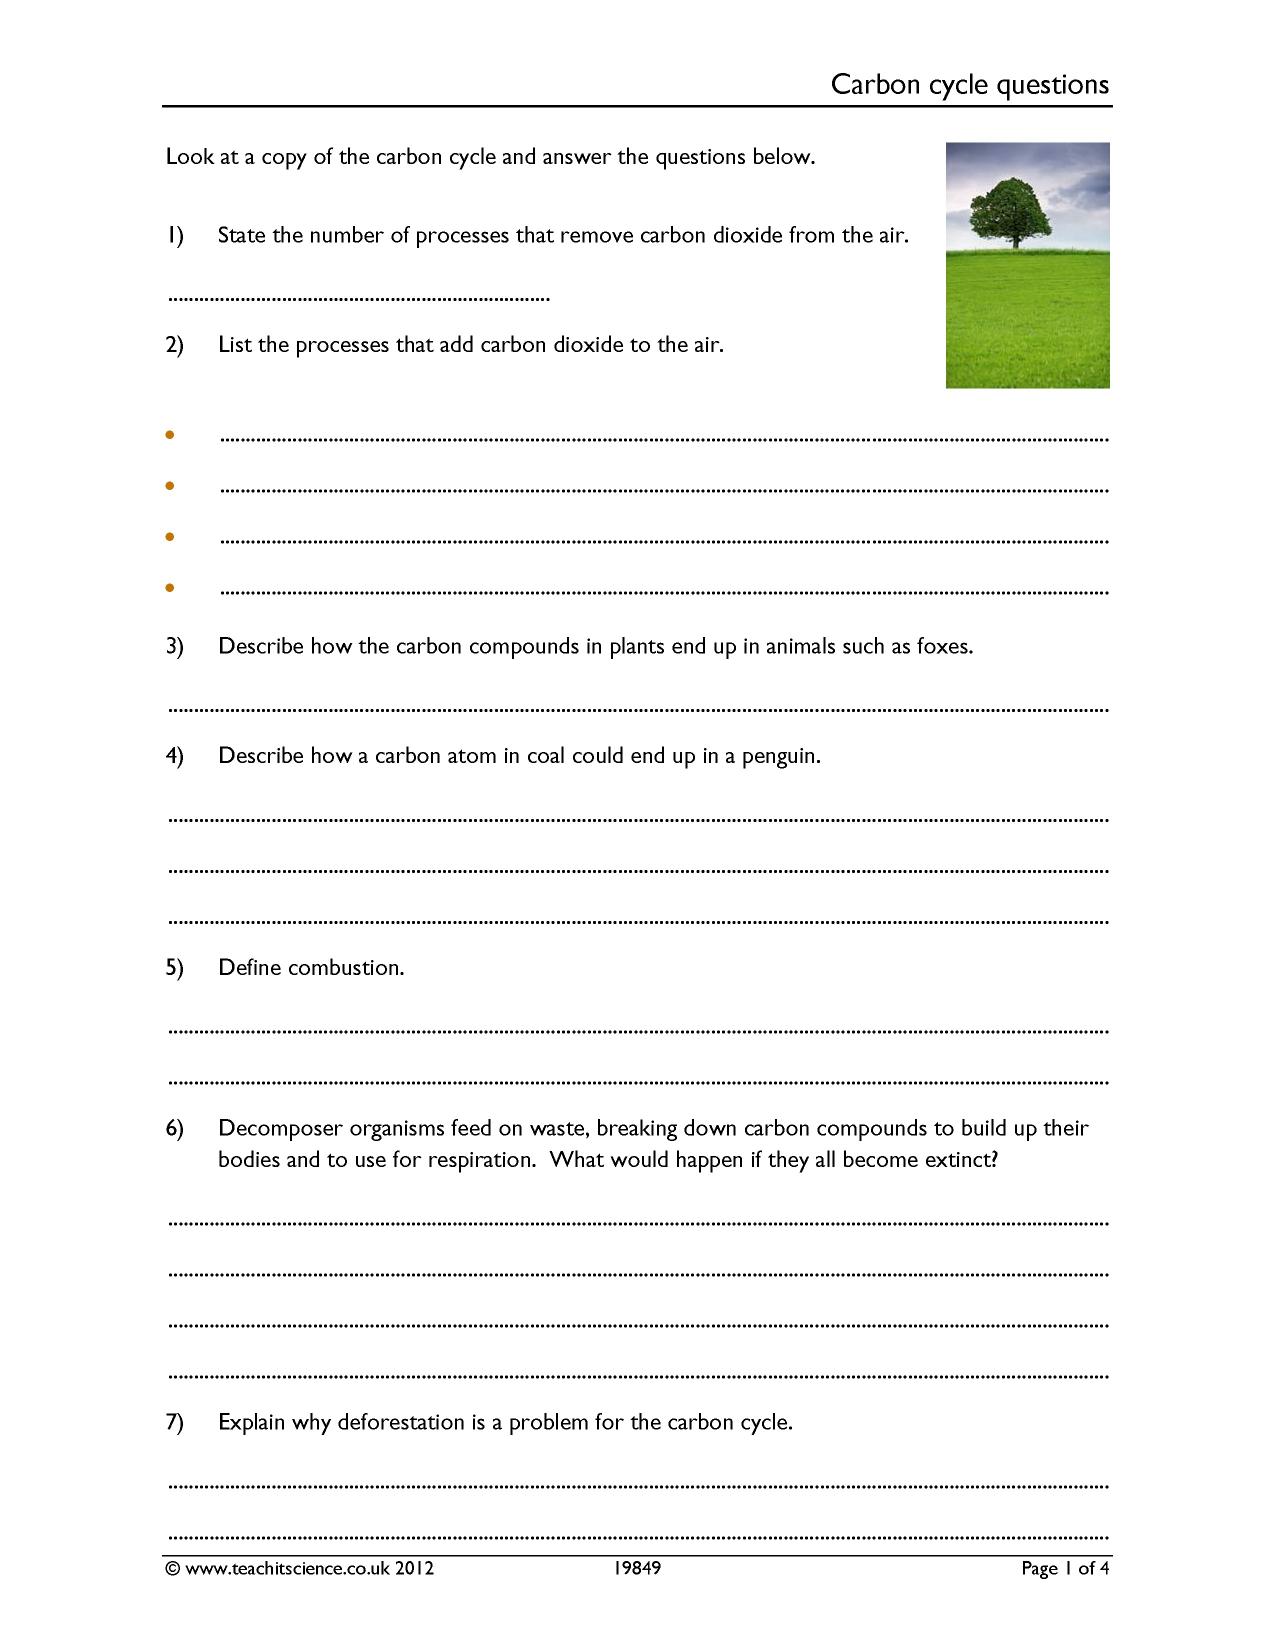 Carbon Cycle Questions Worksheet Pdf Teachit Science